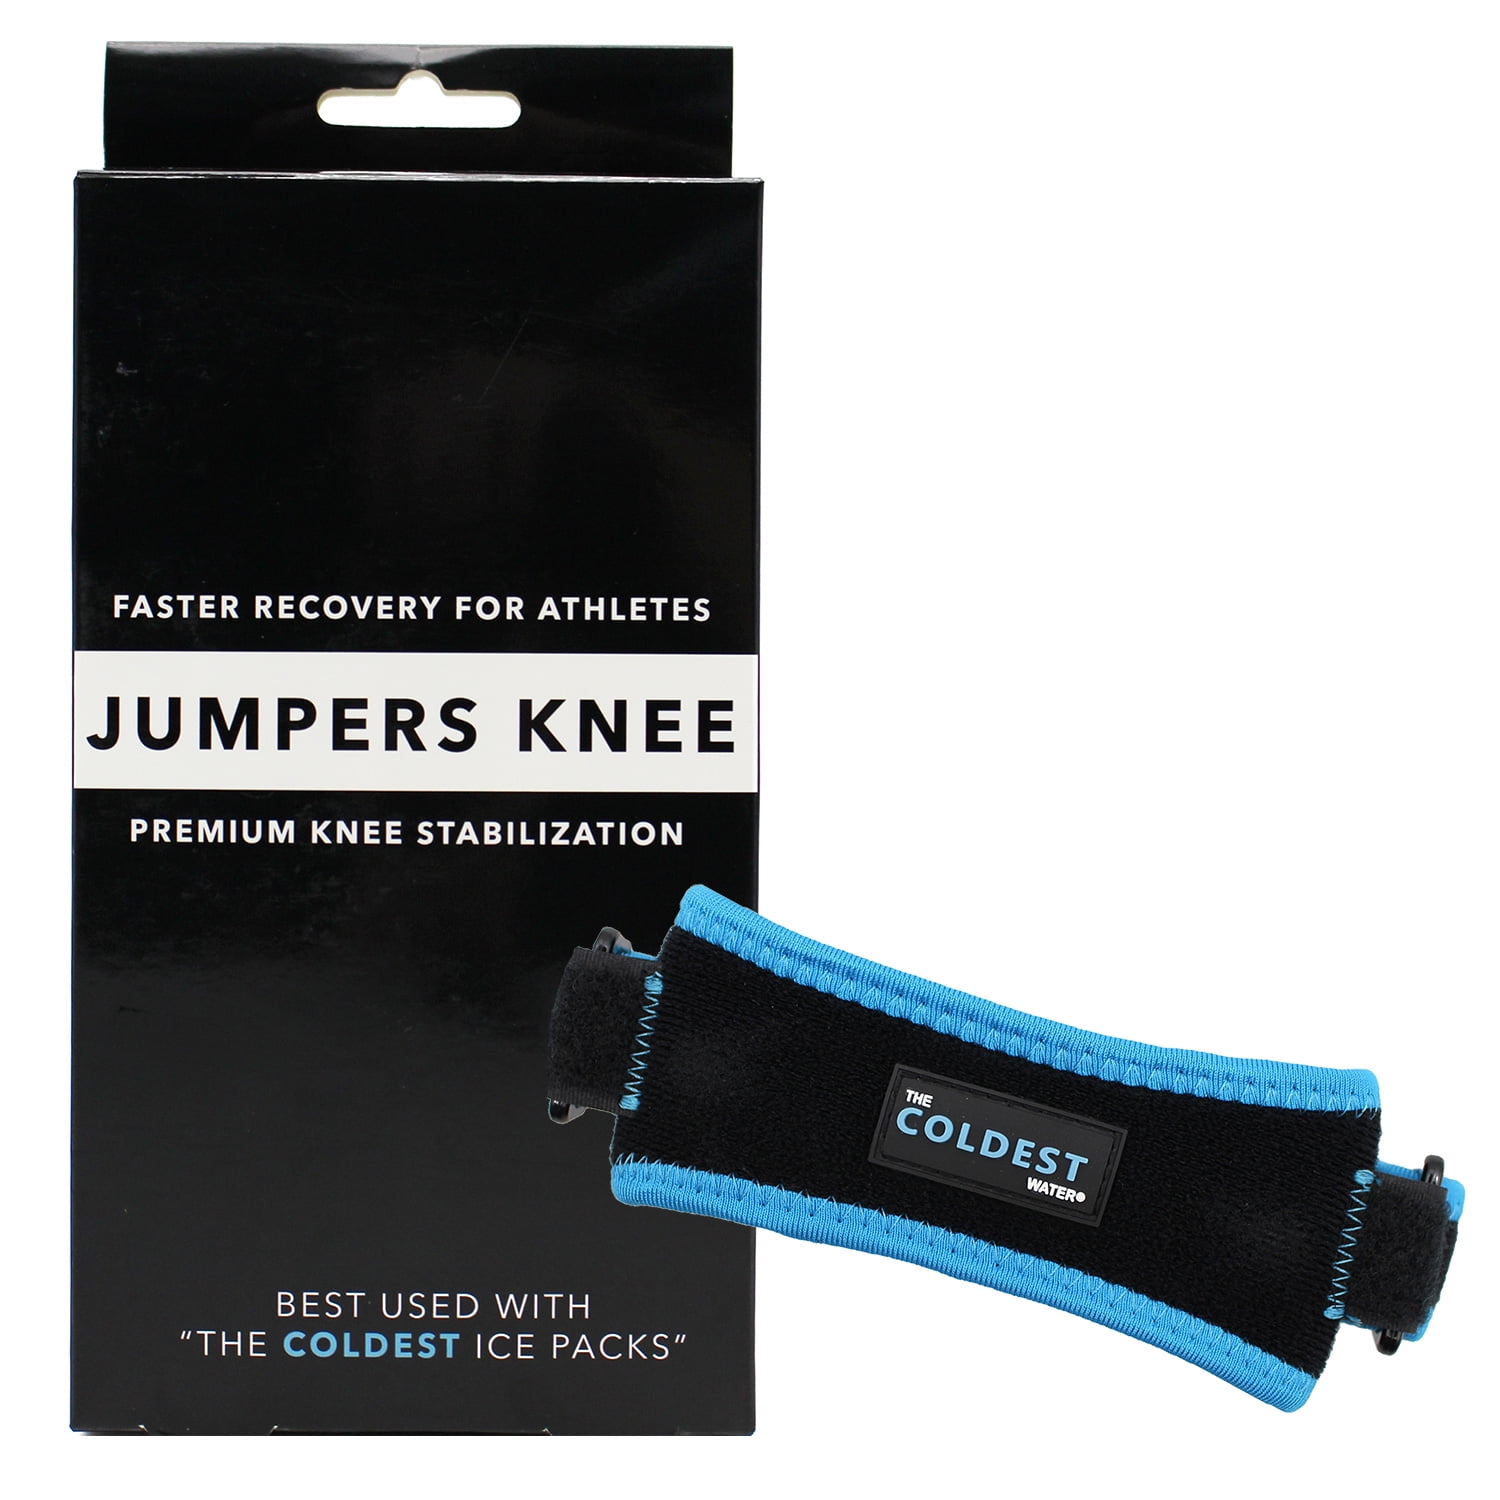 Jumpers Knee Pain Relief & Patella Stabilizer Knee Strap Brace Support for  Hiking, Soccer, Basketball, Running, Jumpers Knee, Tennis, Tendonitis, 